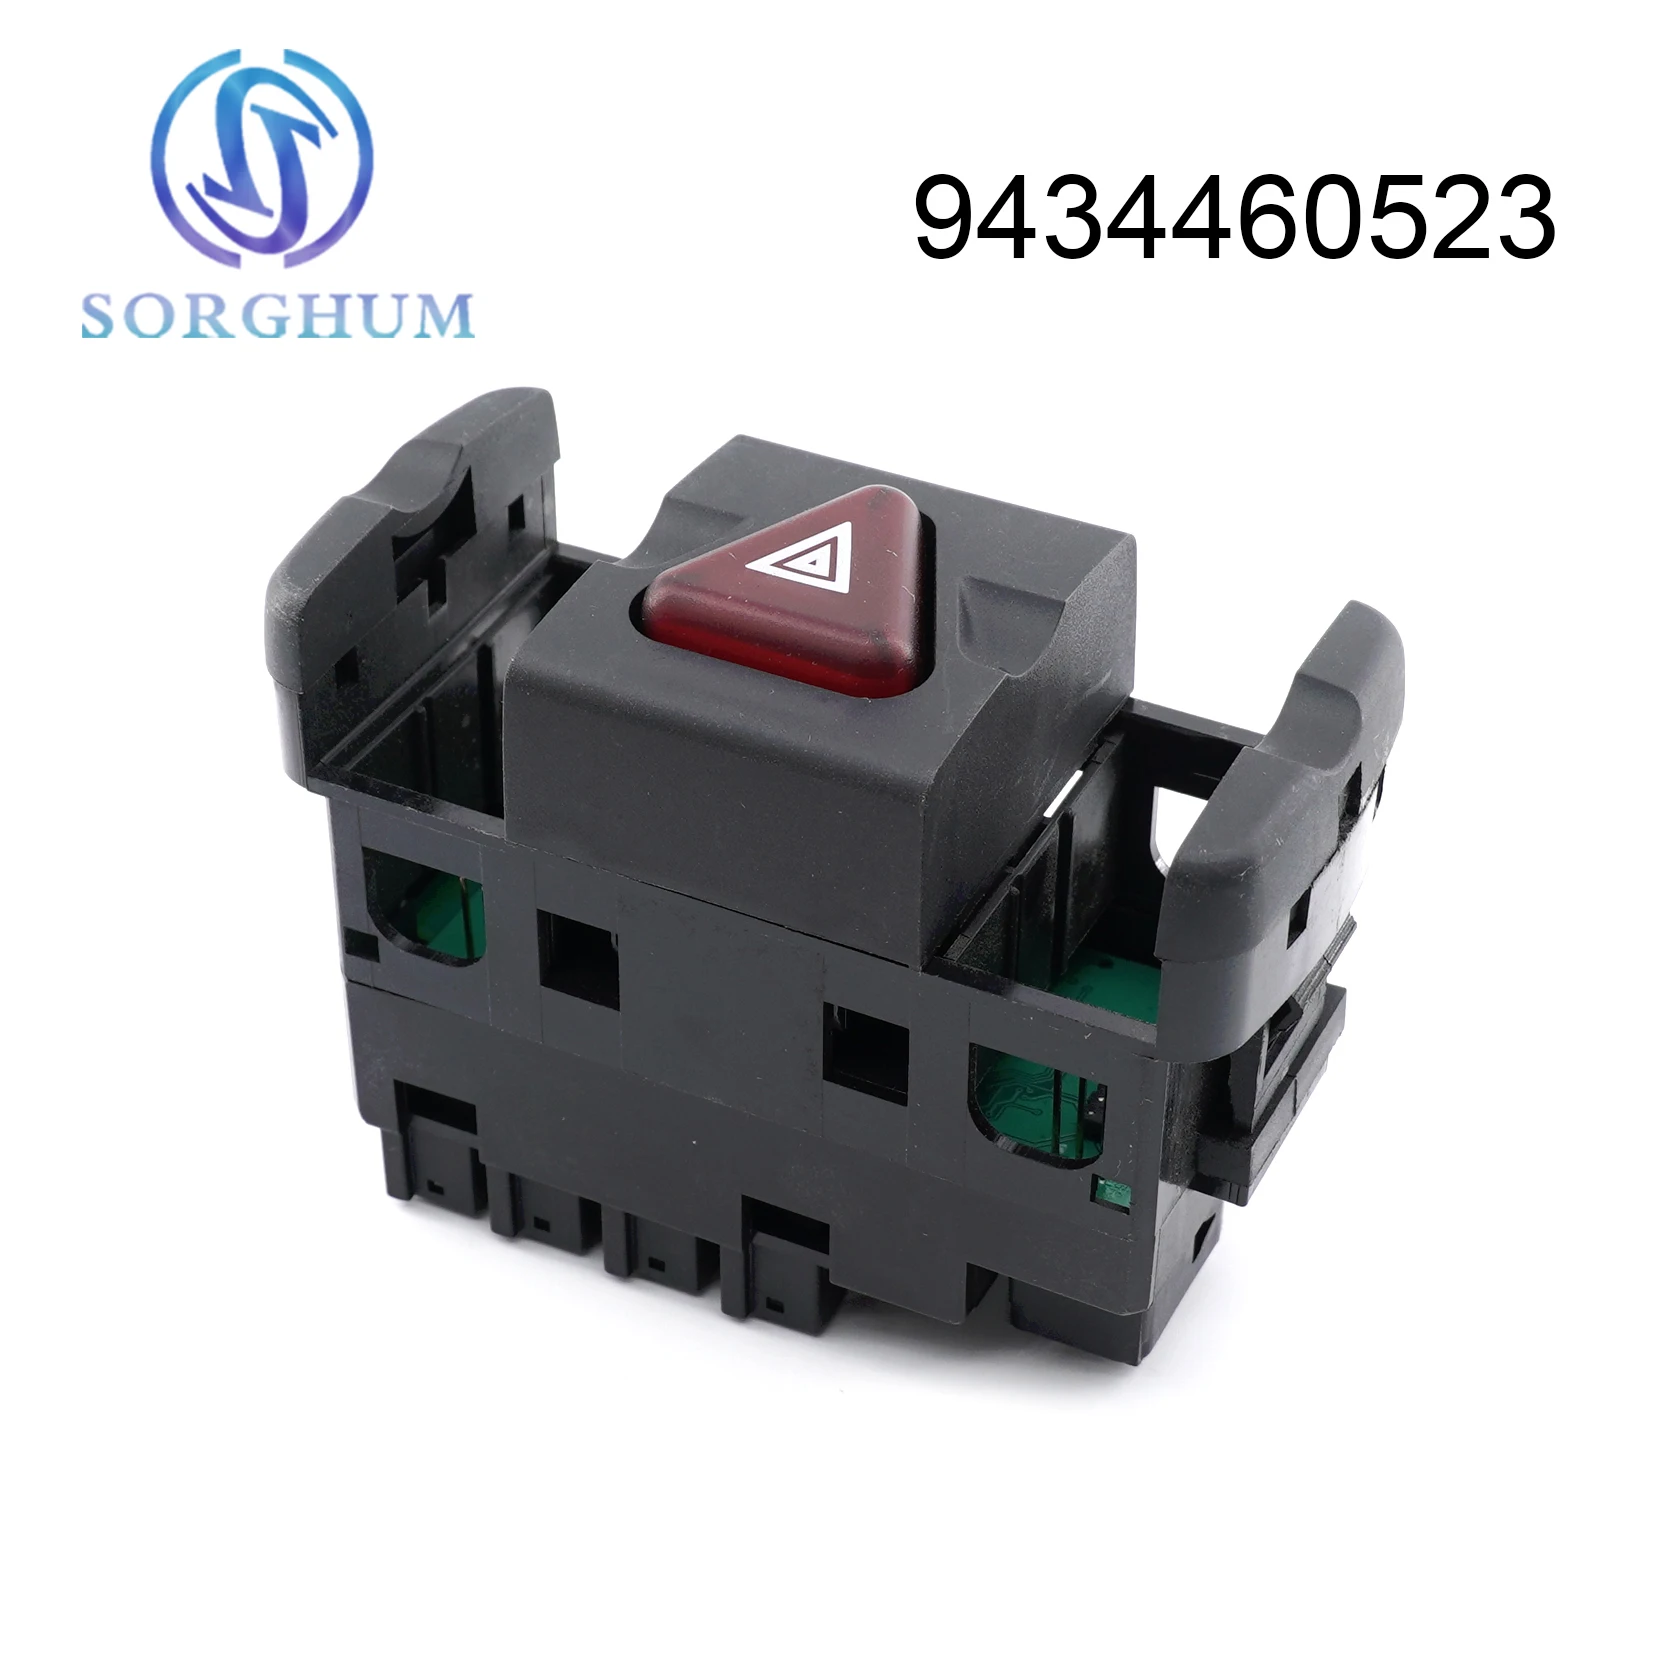 

Sorghum 9434460523 9434460123 9434460323 9434460423 9434460023 Hazard Warning Light Switch For Mercedes-Benz Actros Truck Parts